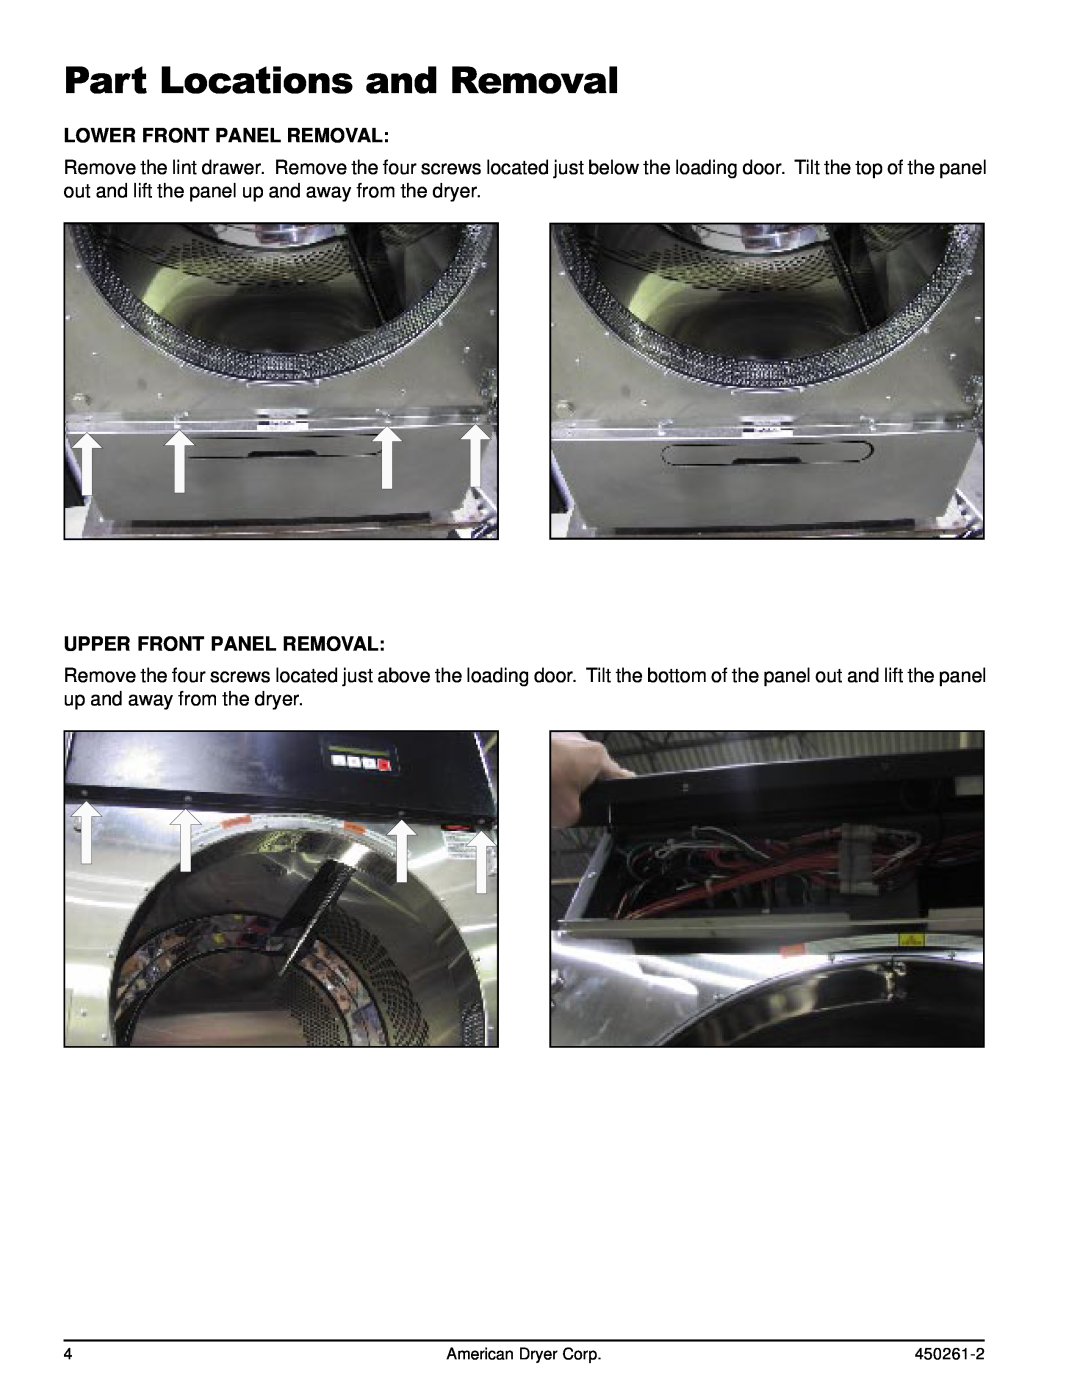 American Dryer Corp AD-20, CG20, D20, SL20 Part Locations and Removal, Lower Front Panel Removal, Upper Front Panel Removal 